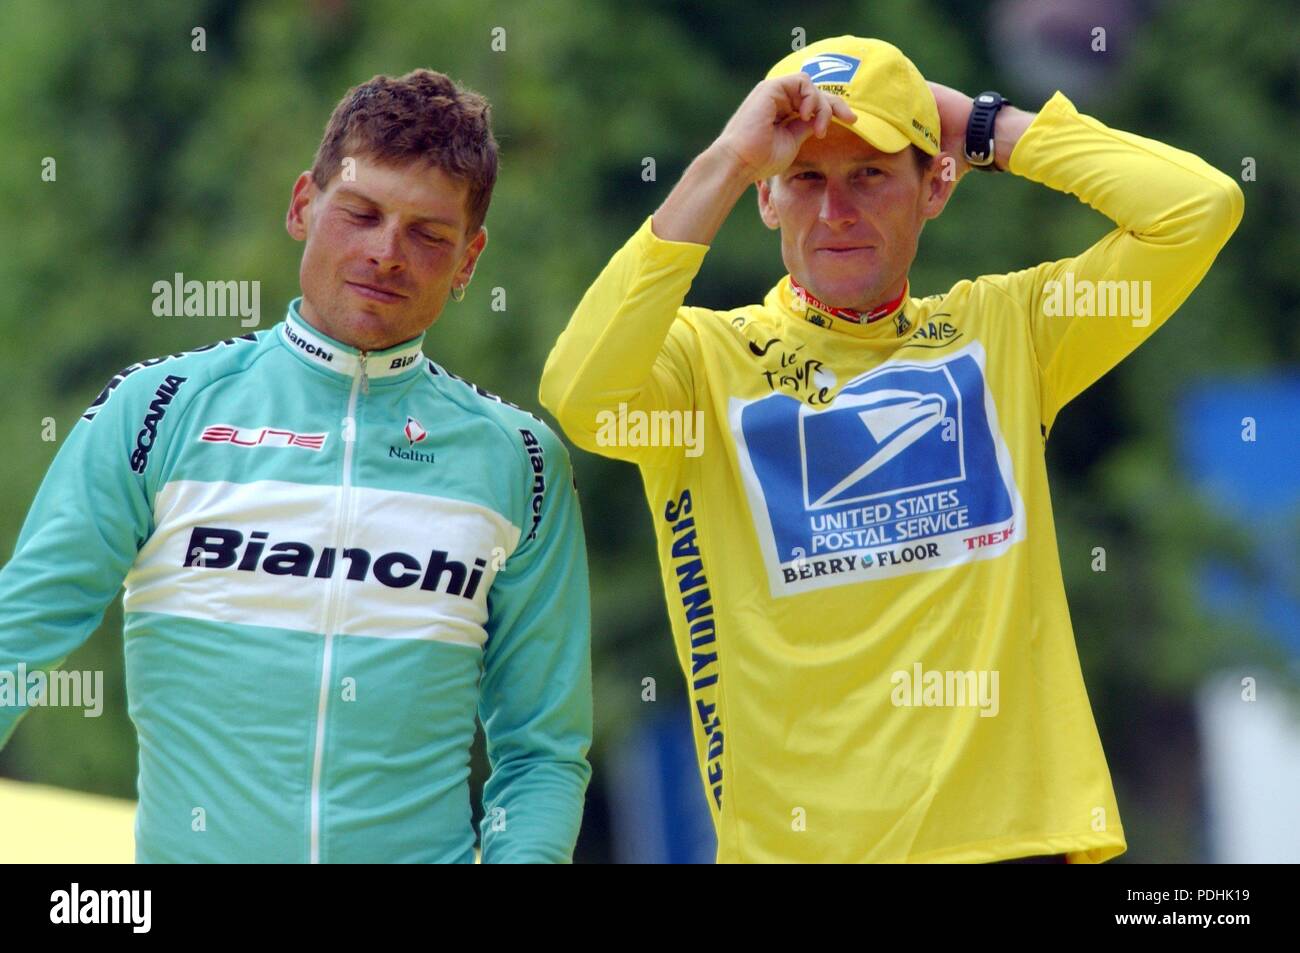 (dpa) - Second placed German Jan Ullrich (L) of Team Bianchi and victorious US Postal-Berry Floor's Lance Armstrong (R) from the US stand side by side on the podium after the 20th stage of the 2003 Tour de France cycling racein Paris, 27 July 2003. Armstrong became the second rider in history to win the Tour de France on five consecutive occasions tying the record of Spain's Miguel Indurain, who won from 1991 to 1995. The 31-year-old American finished the centenary running of the Tour with a lead of 1:01 minutes over German Jan Ullrich, with Alexandre Vinokourov of Kazakhstan in third place, 4 Stock Photo